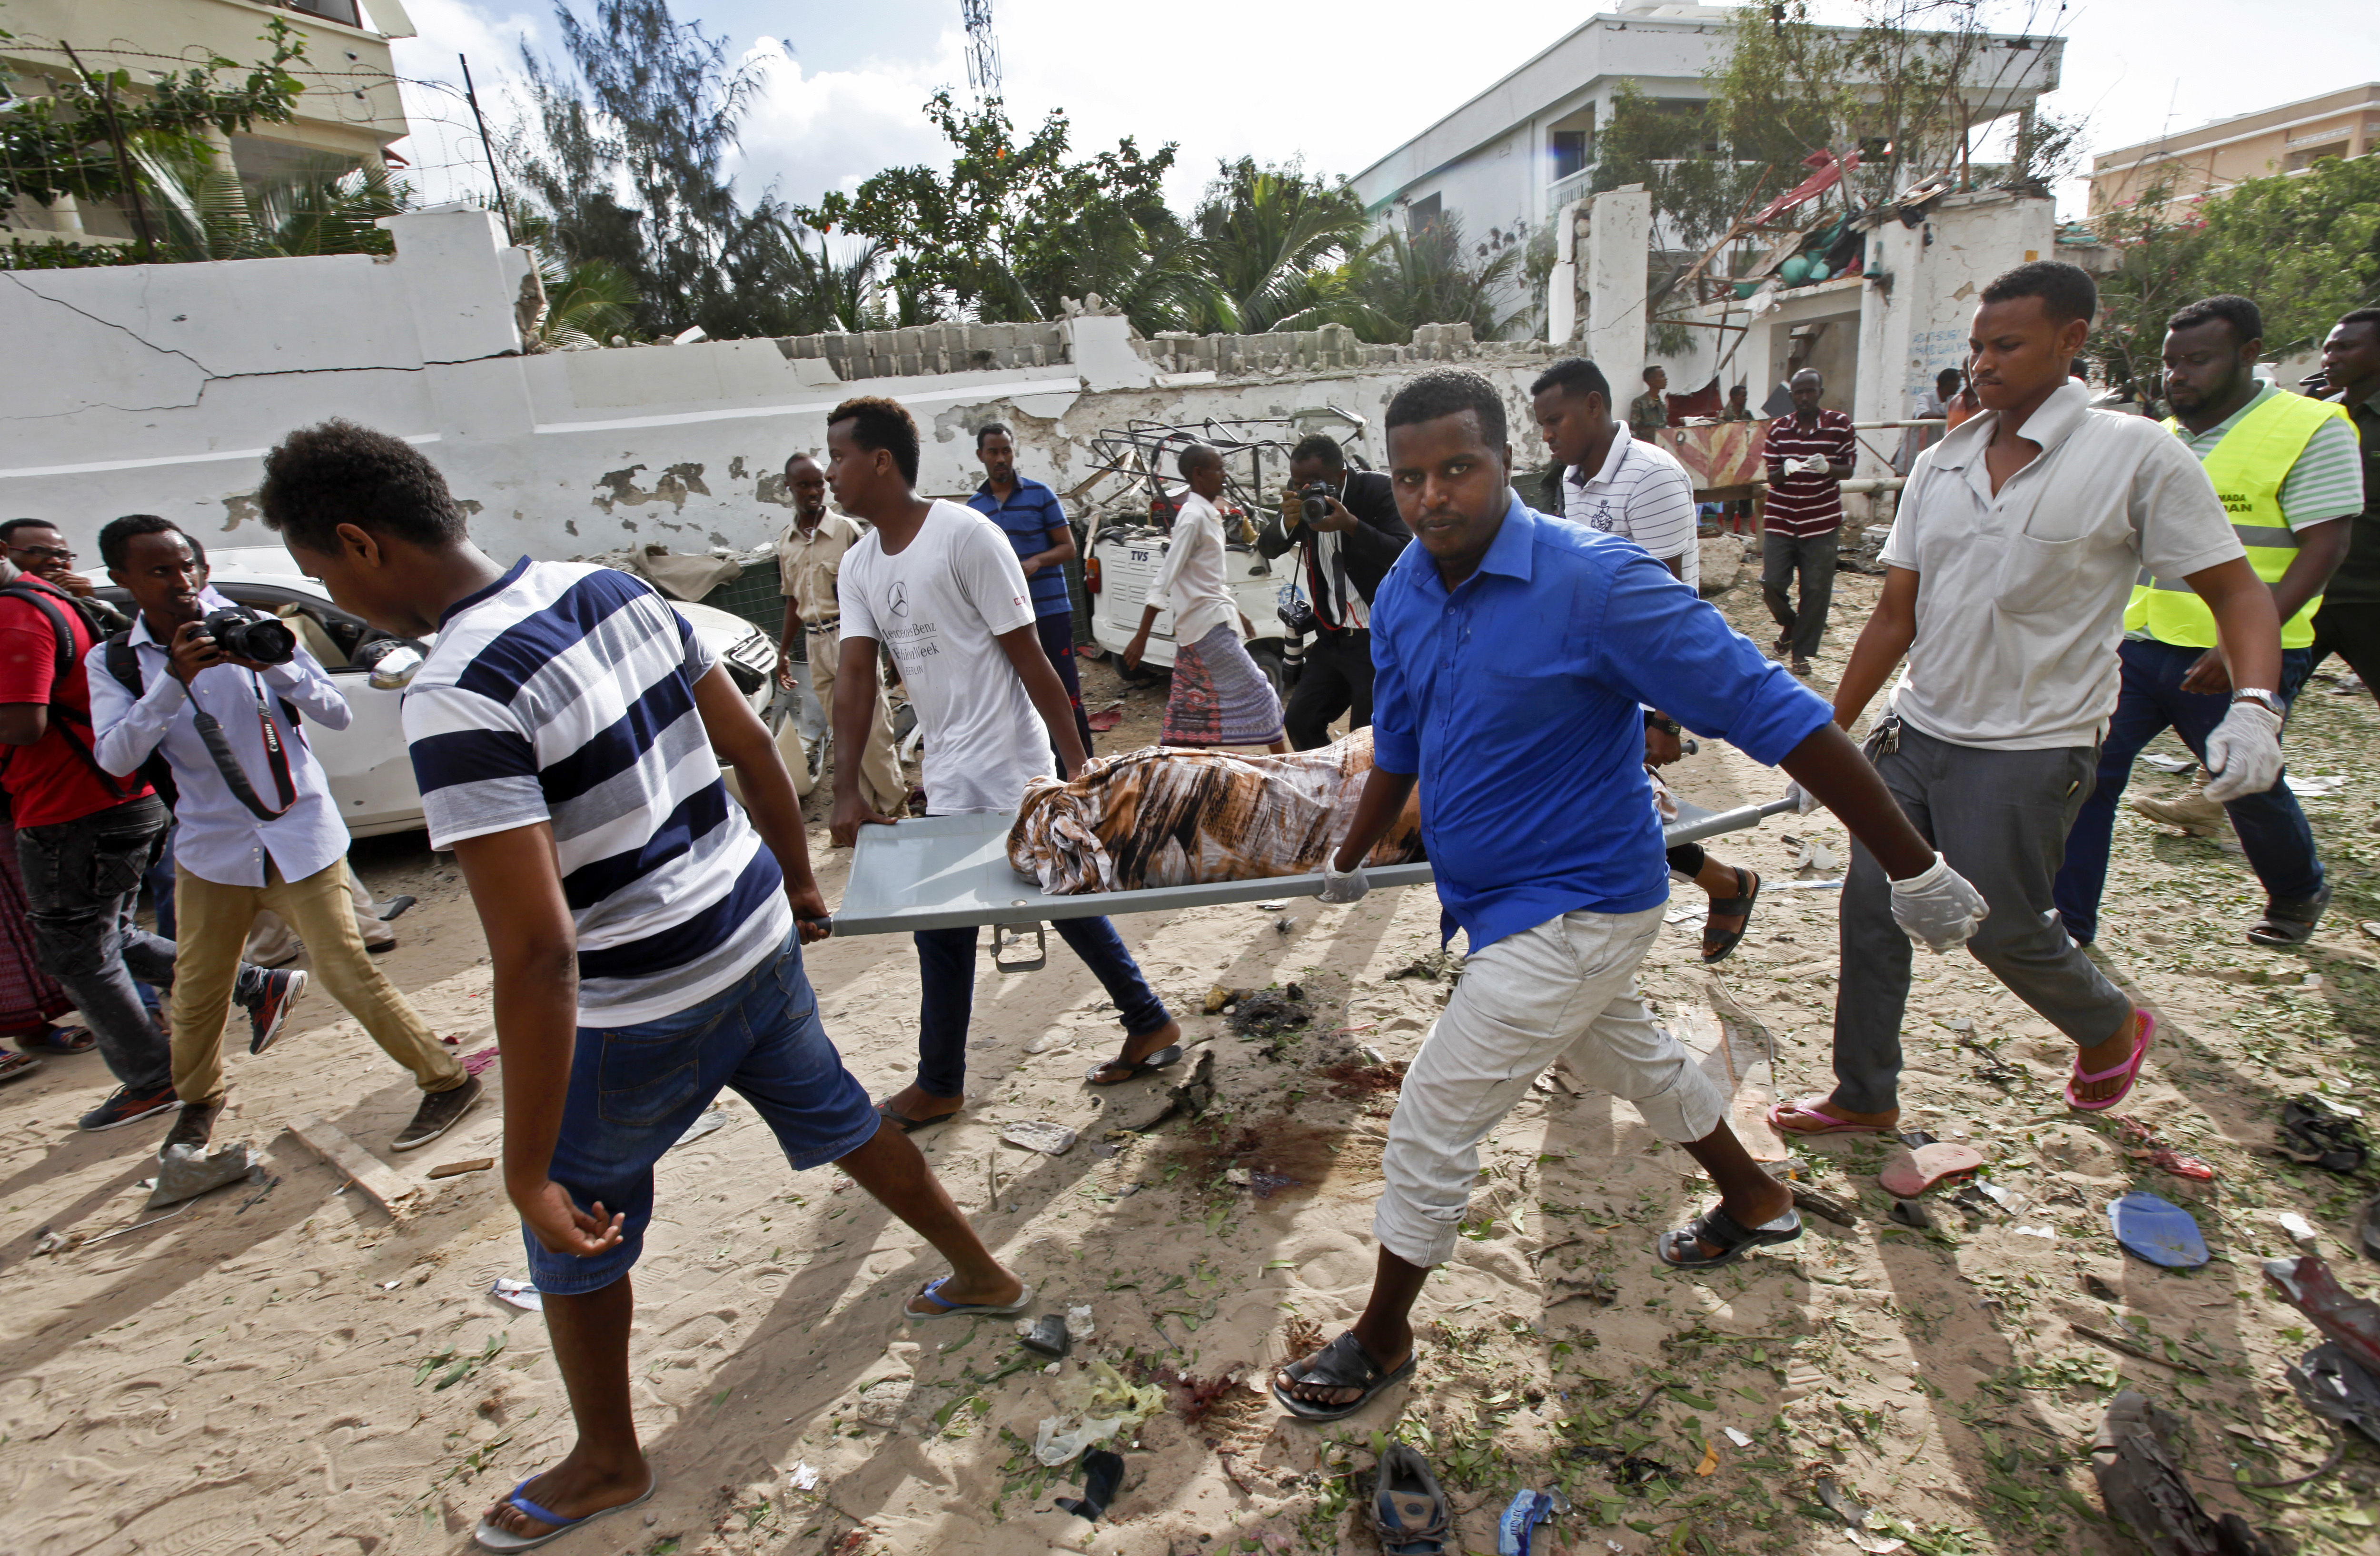 Somali men carry away the body of a civilian who was killed in a militant attack on a restaurant in Mogadishu, Somalia Thursday, June 15, 2017. Somalia's security forces early Thursday morning ended a night-long siege by al-Shabab Islamic extremists at the popular 